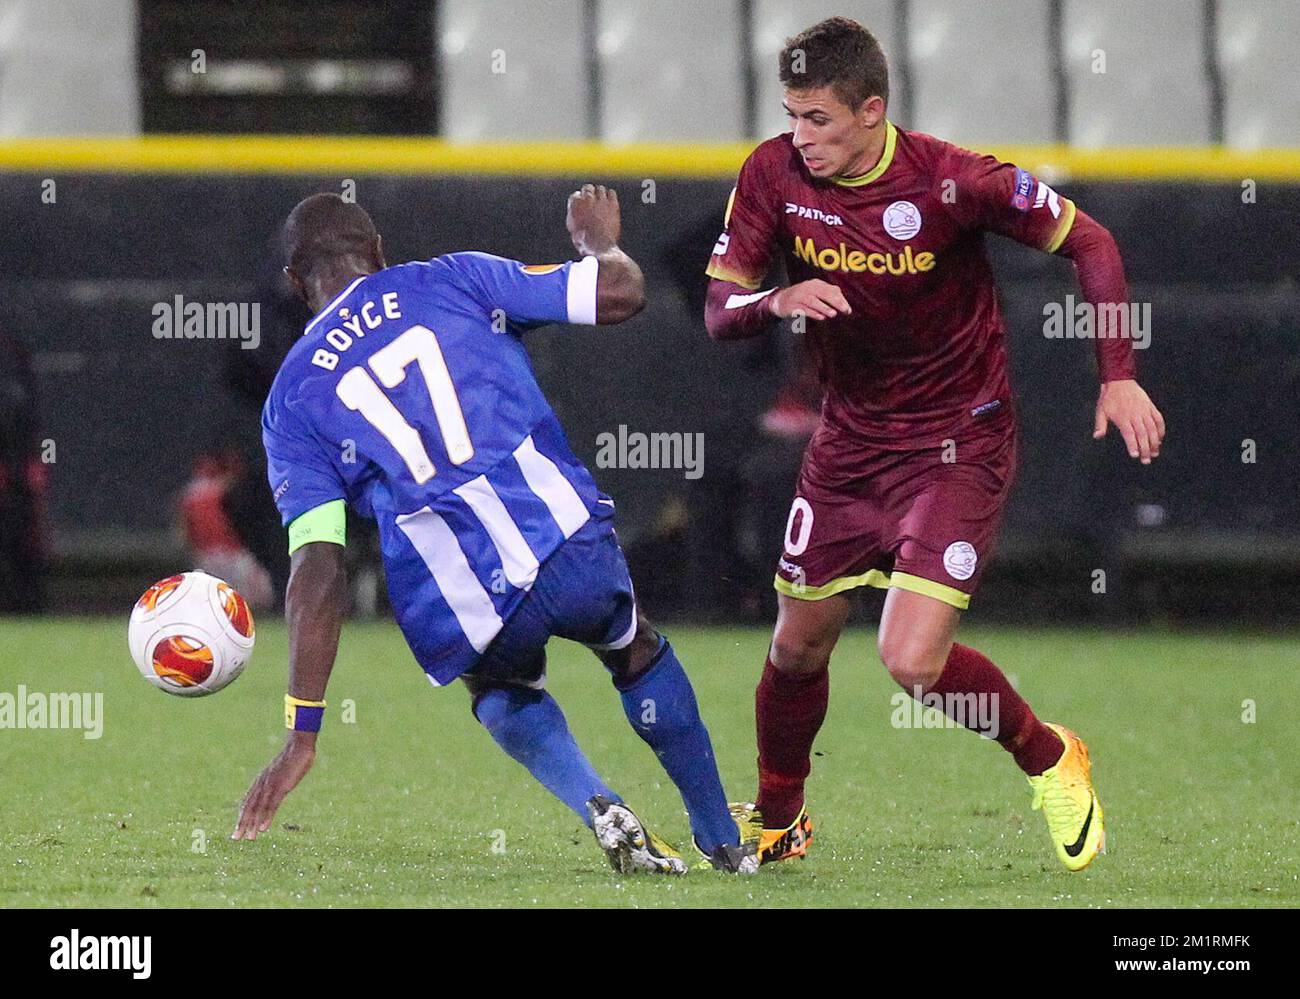 Wigan's Emmerson Boyce and Essevee's Thorgan Hazard fight for the ball during a match of Belgian first division soccer team Zulte Waregem and English club Wigan Athletic F.C., in group D, on the first day of the group stage of the Europa League tournament in Brugge stadium, Thursday 19 September 2013. BELGA PHOTO VIRGINIE LEFOUR Stock Photo